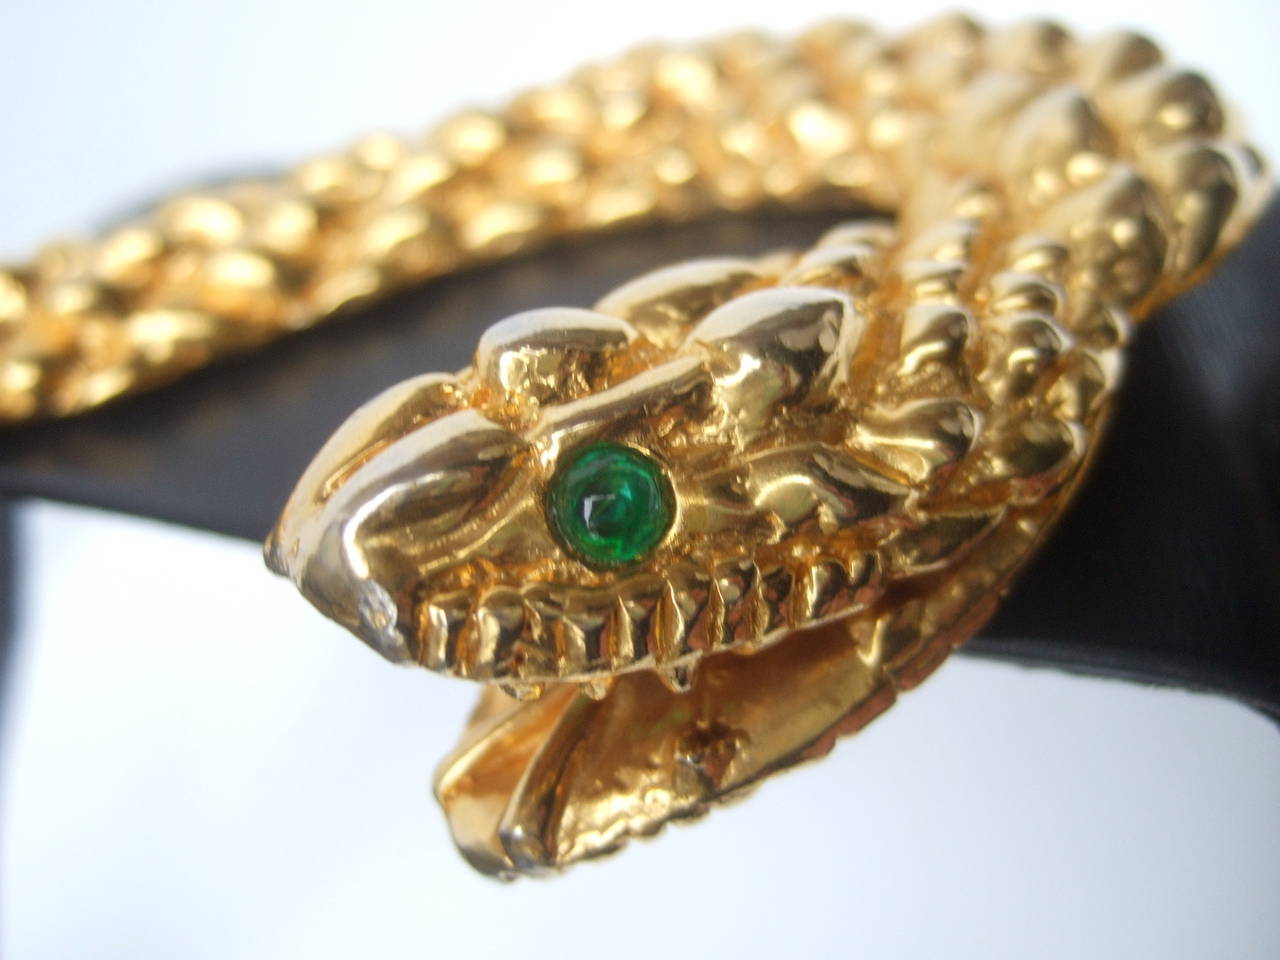 Judith Leiber Ornate gilt metal serpent black leather belt c 1980s
The avant-garde wide black leather belt is adorned with a massive gilt metal coiled serpent embellished with green glass cabochon eyes & textured gilt metal that emulates